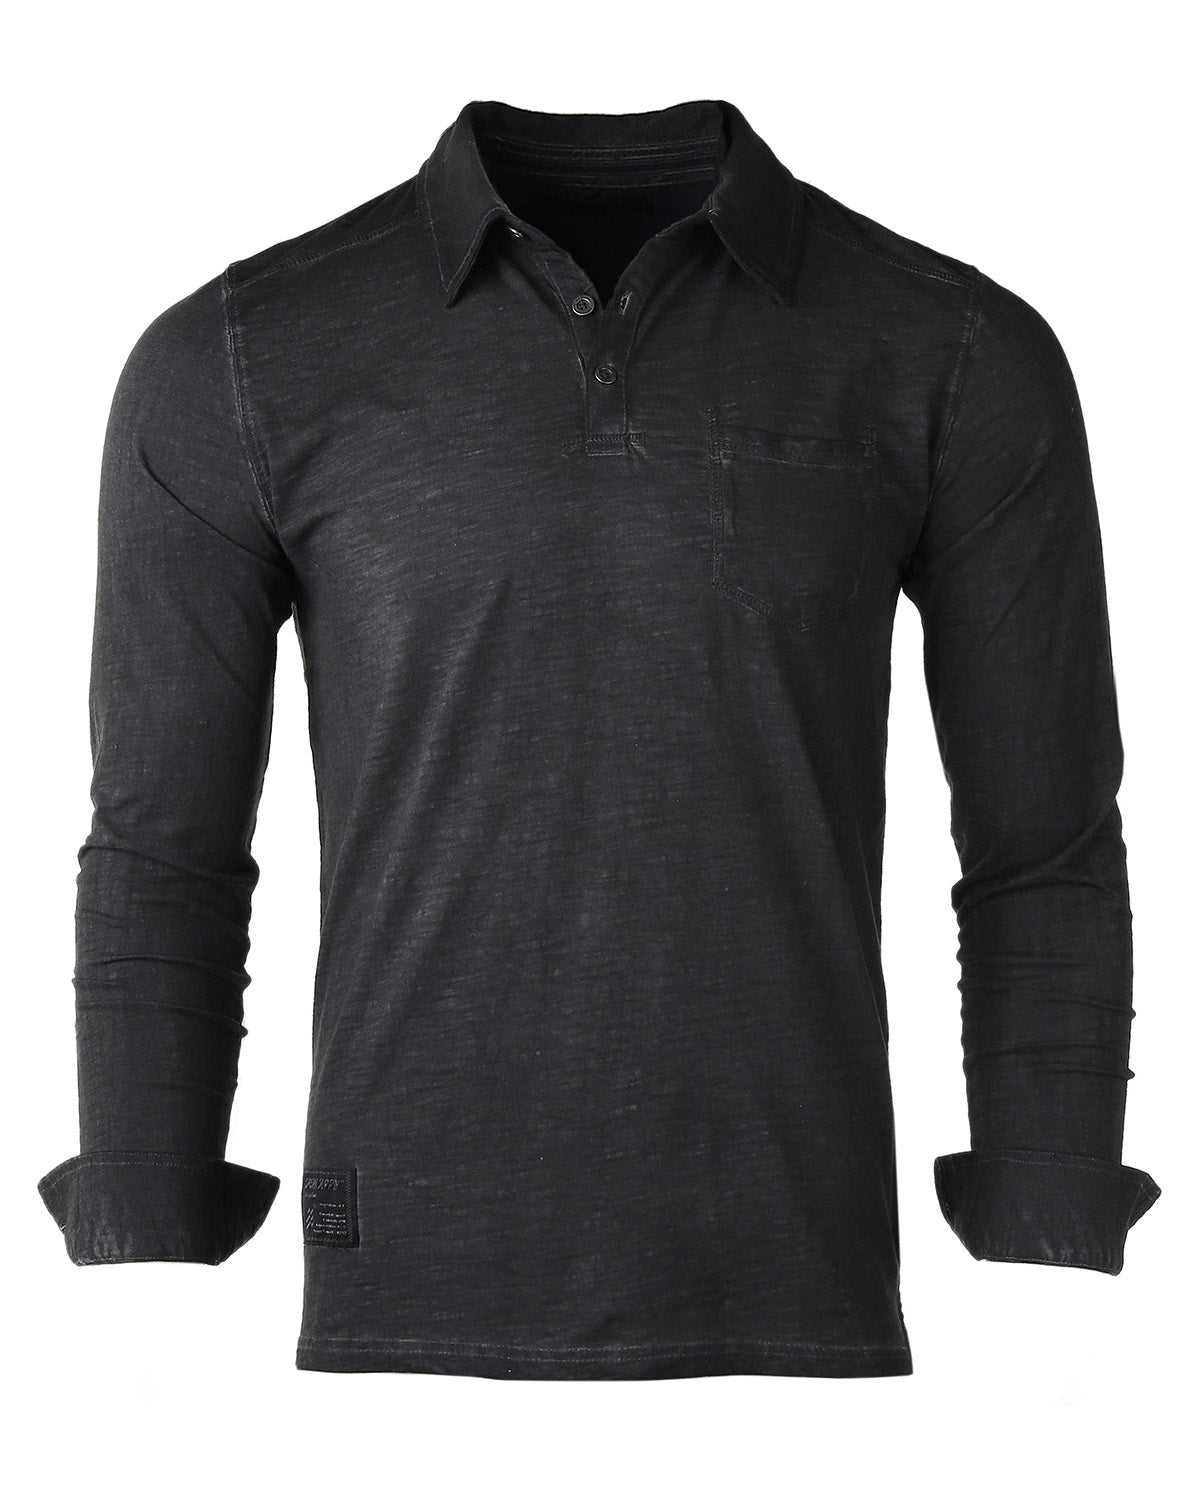 Men's Long Sleeve Oil Wash Vintage Henley Button Cuffs Pocket Polo T-Shirt